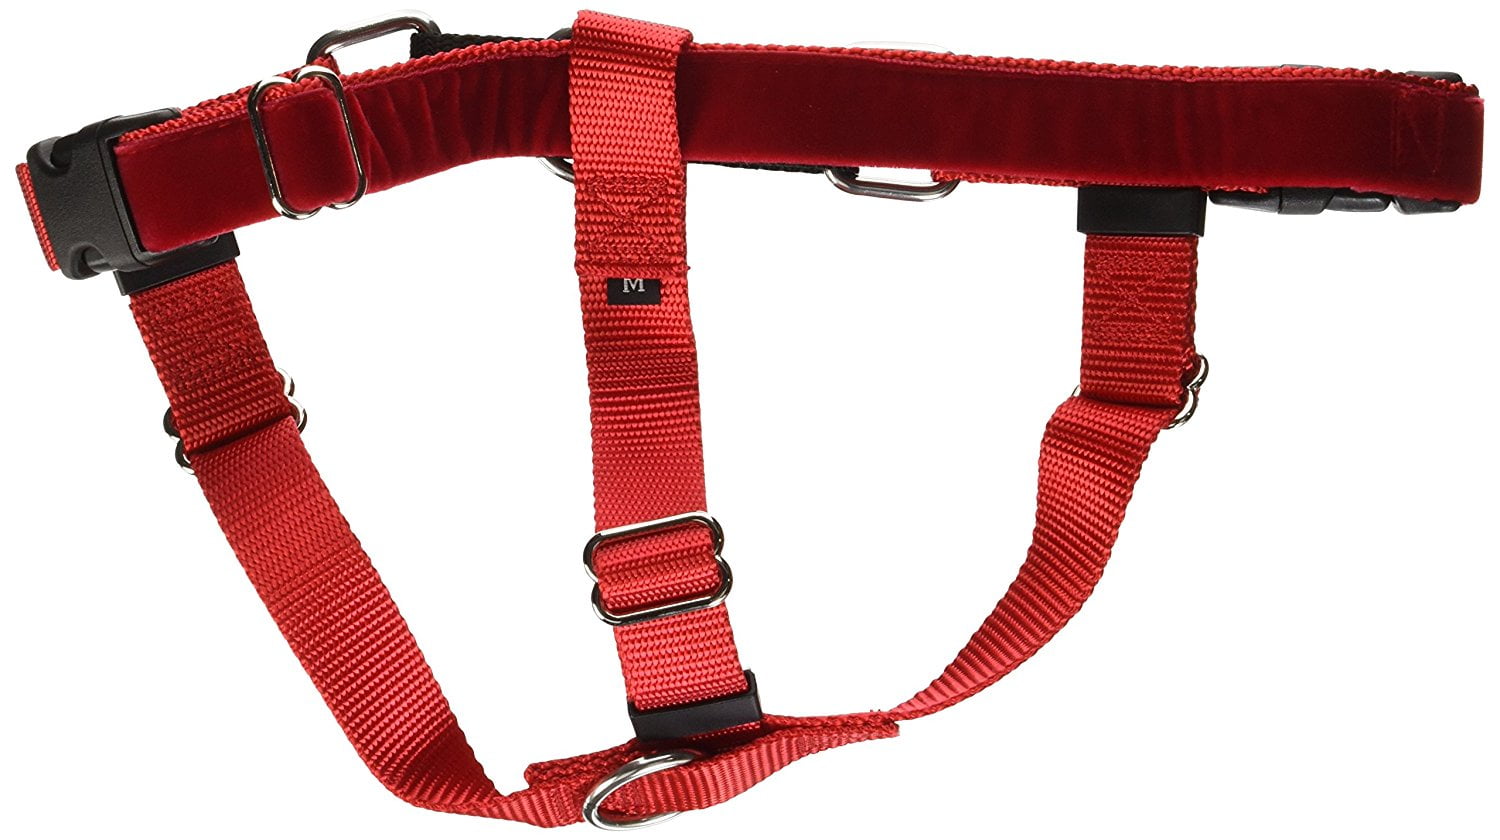 Freedom No Pull Dog Harness Training Package Medium 1 Wide Red The Freedom No Pull Harness Design Minimizes Or Eliminates Pulling Neck Strain And The Chance Of By 2 Hounds Design From Usa